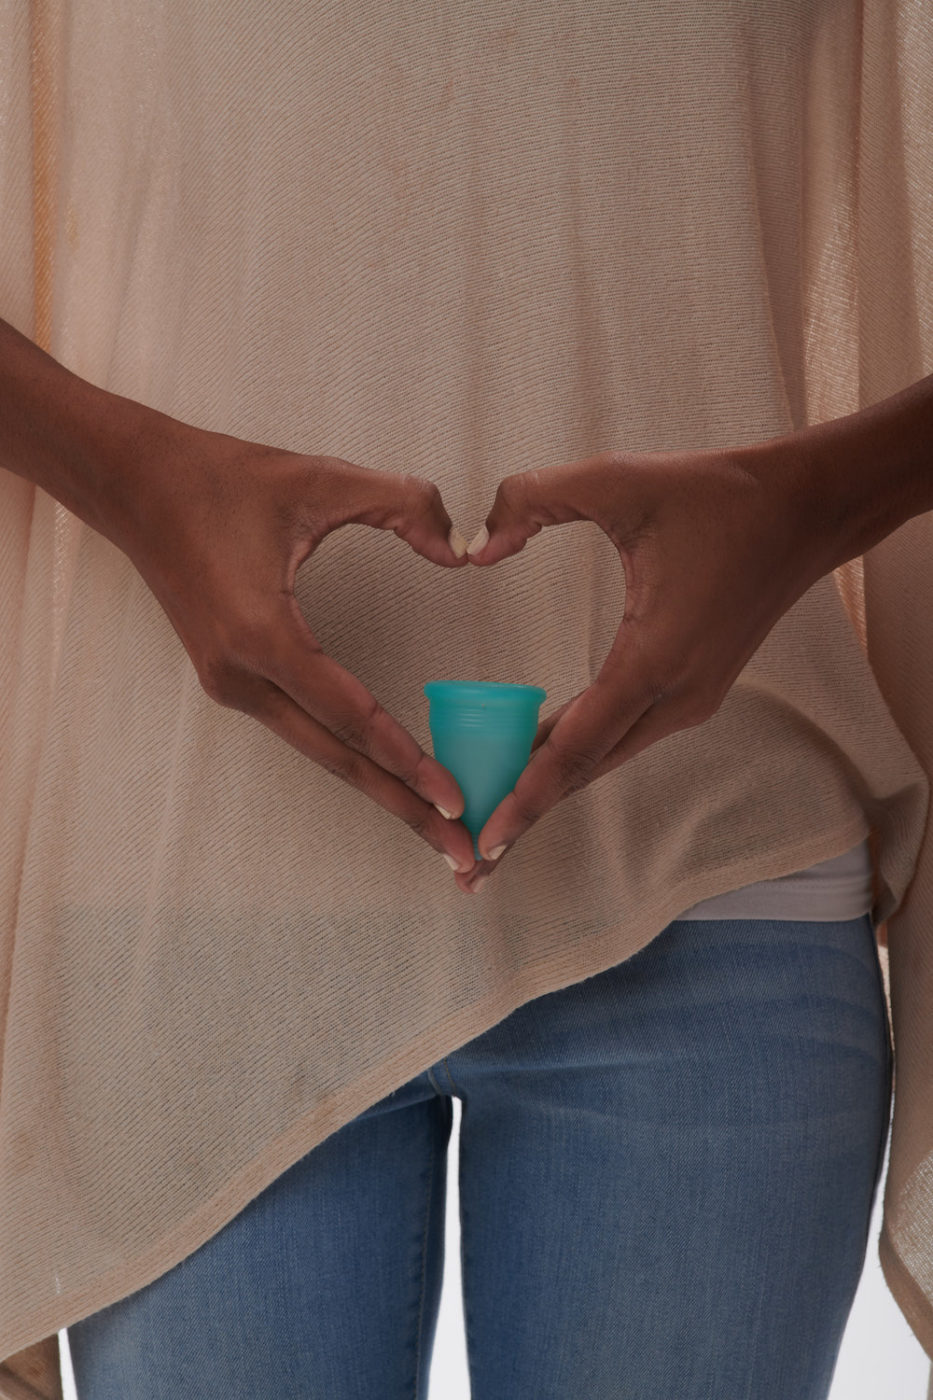 will I feel my menstrual cup